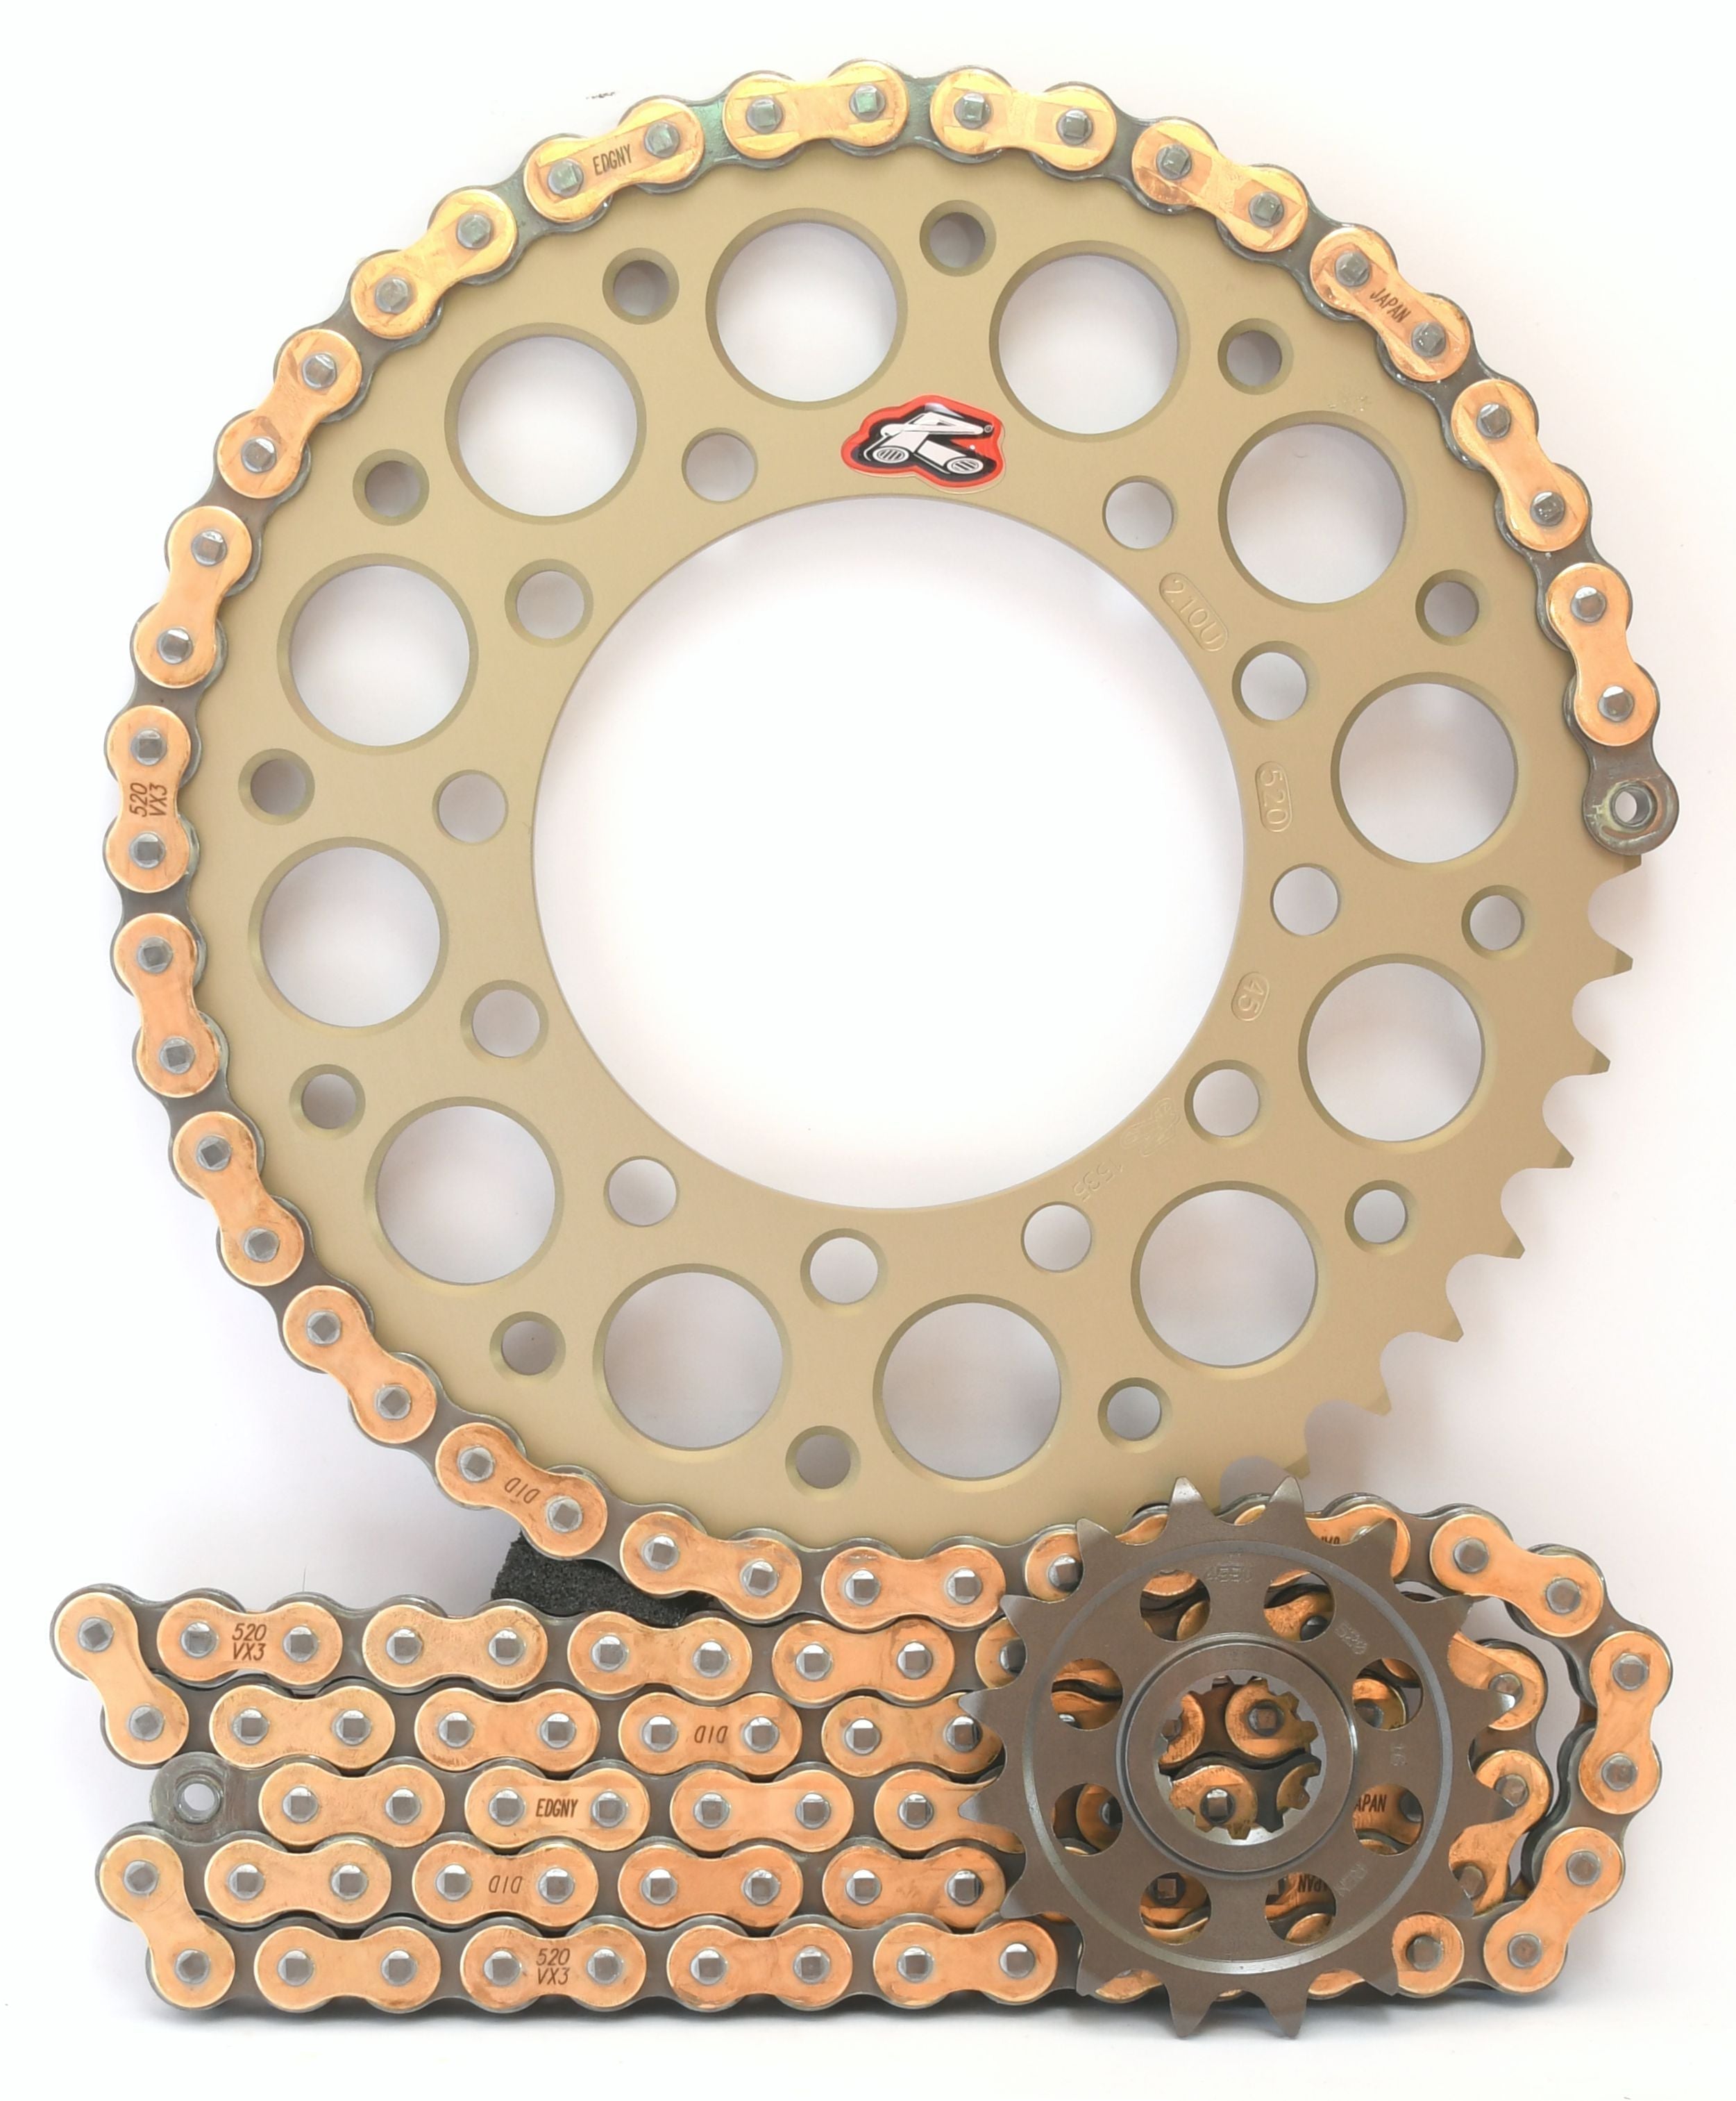 Renthal Ultralight and DID 520 Conversion Chain & Sprocket Kit for Kawasaki ZX10R 2011-2015 - Standard Gearing